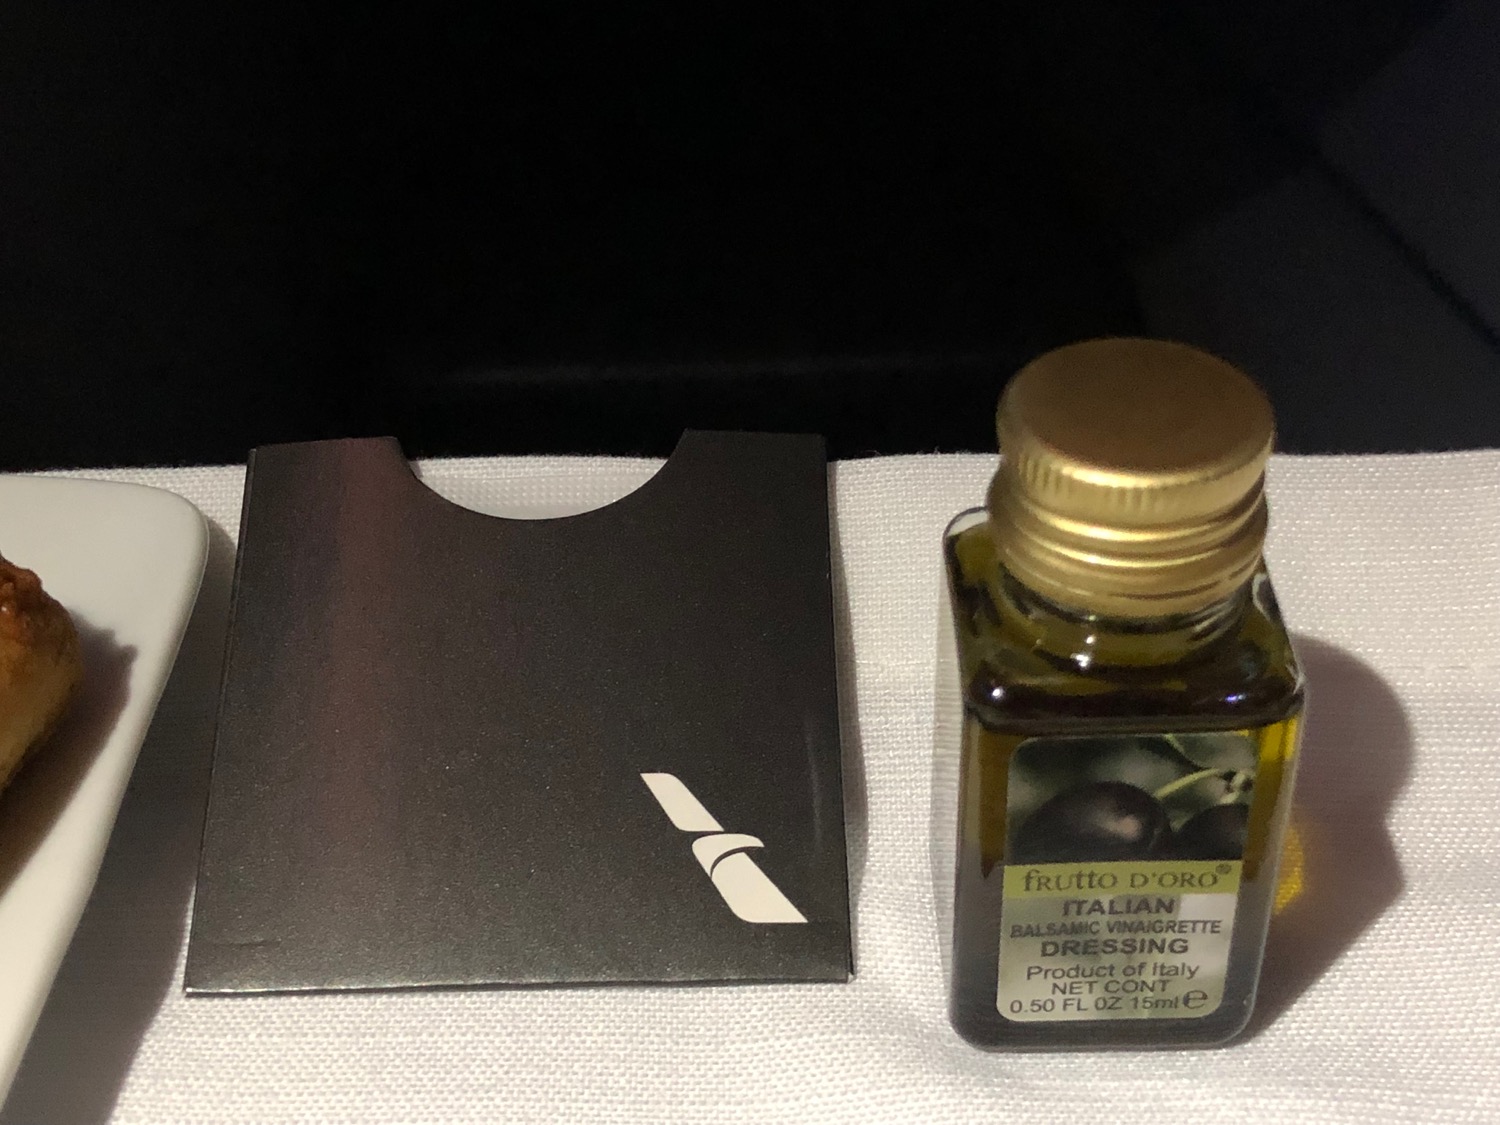 a small bottle of olive oil next to a black bag